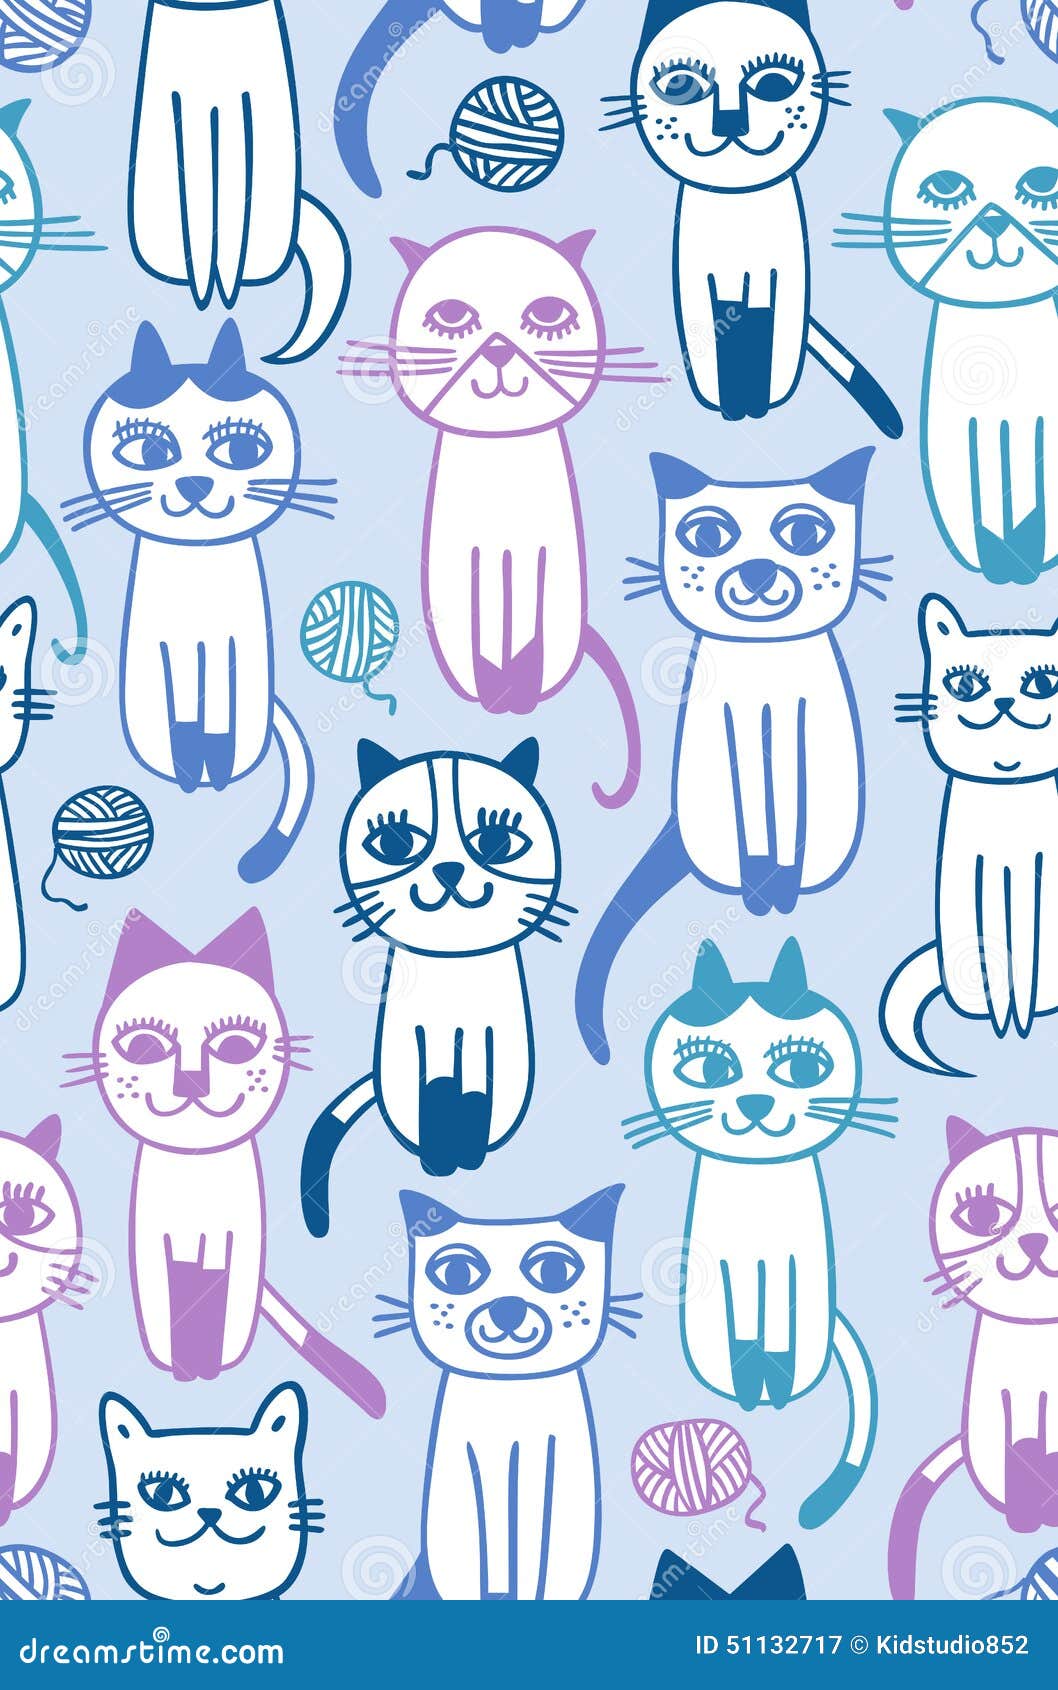 Seamless Cats Fabric Pattern Stock Vector - Illustration of fabric ...